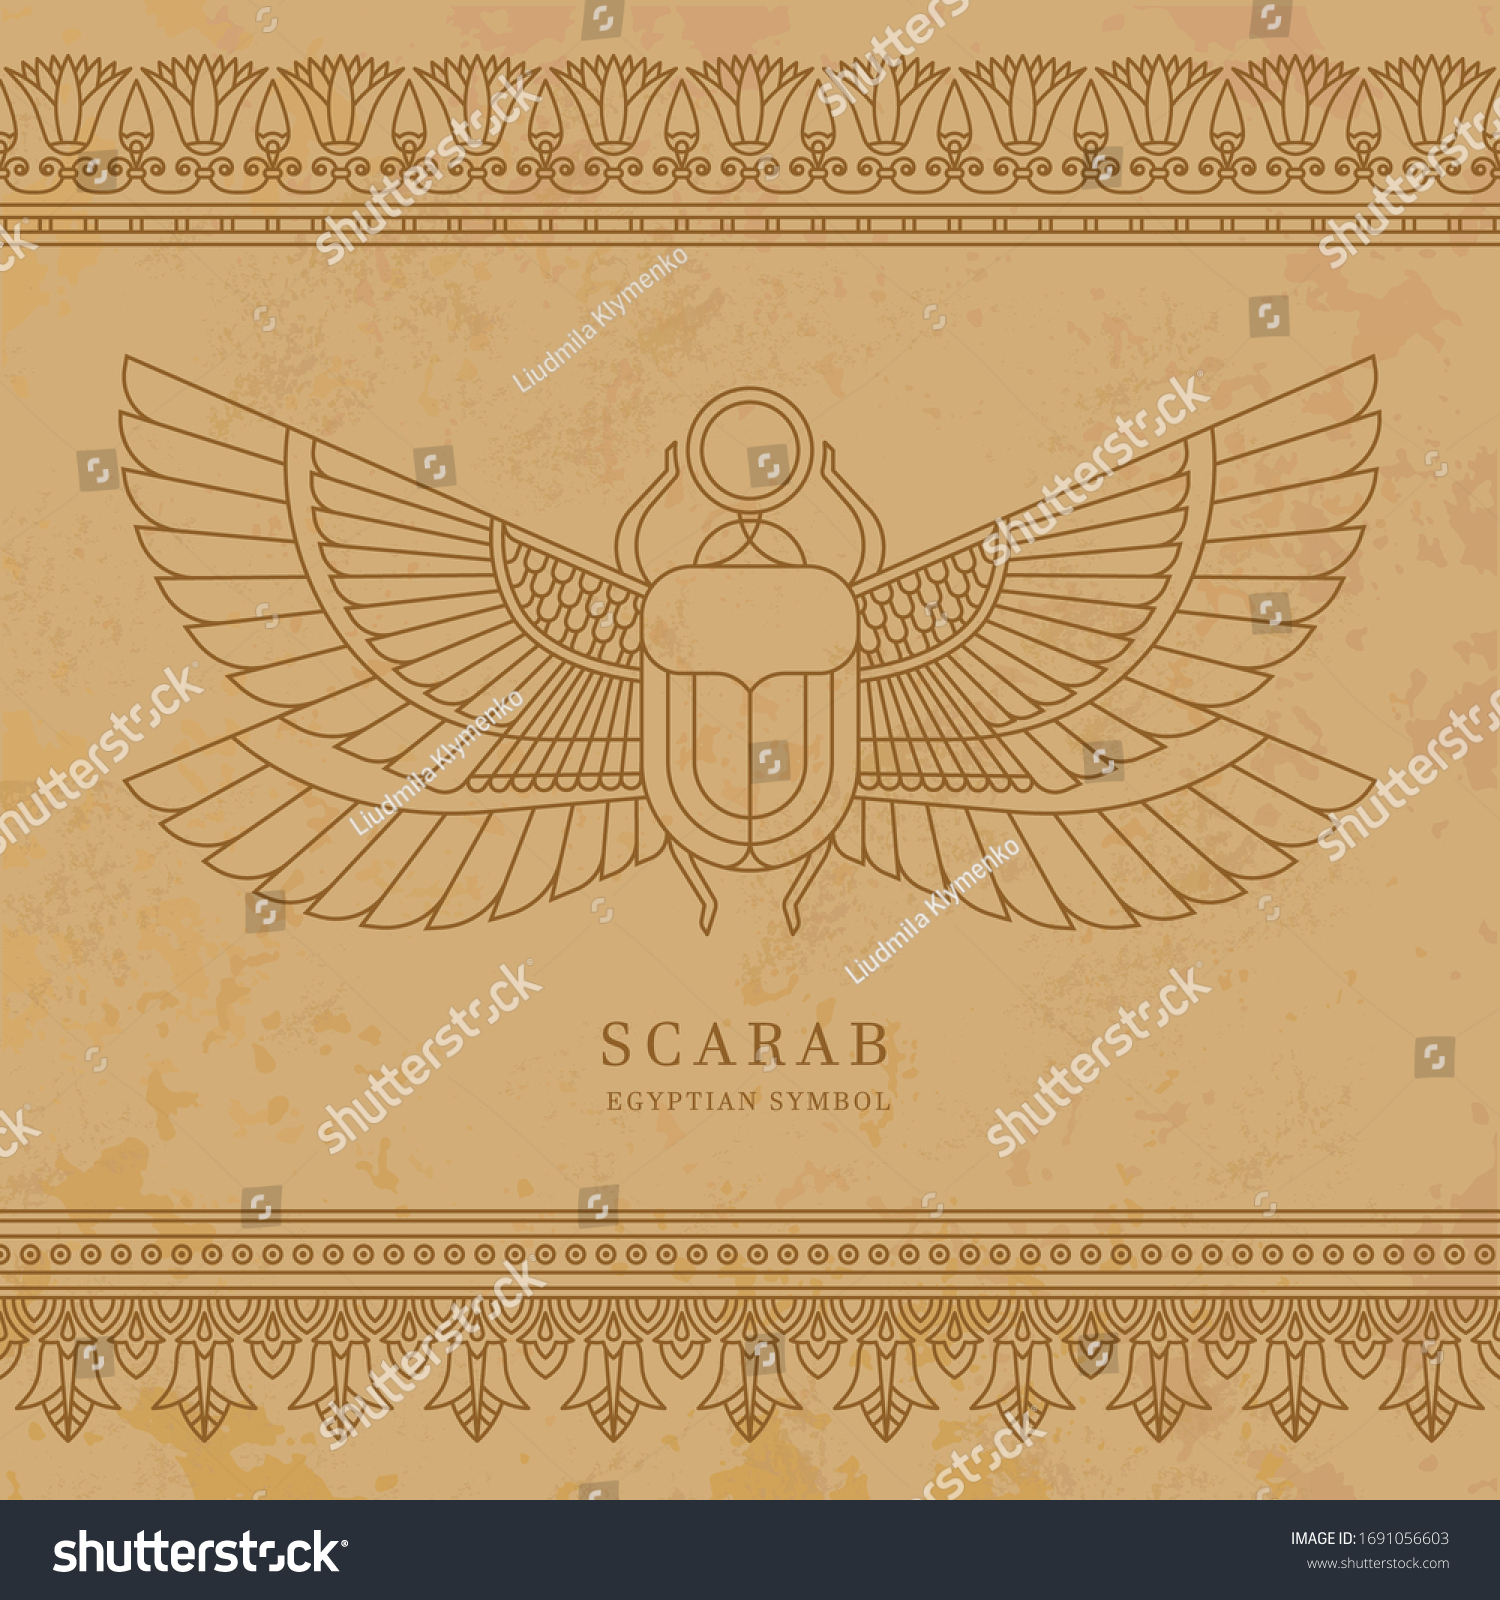 5,487 Ancient egyptian paper Images, Stock Photos & Vectors | Shutterstock